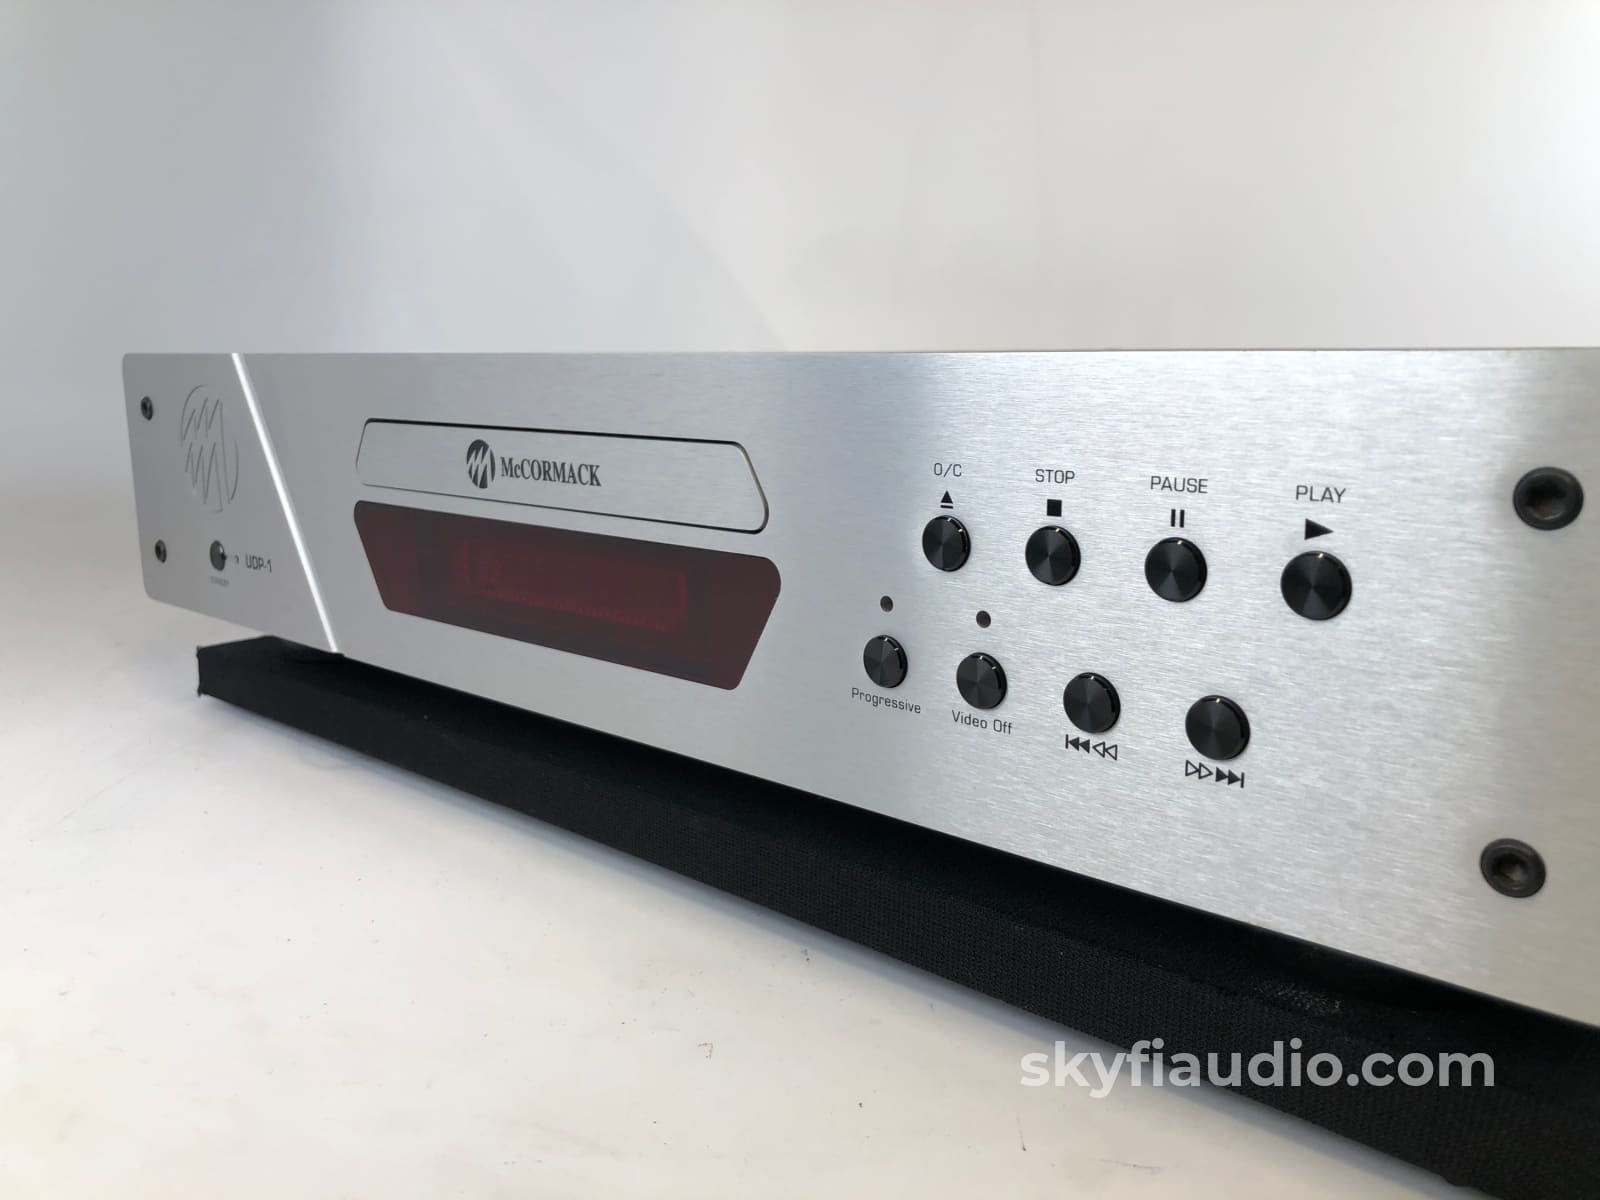 Mccormack Udp-1 Sacd/Cd Player - Burr-Brown Dacs Complete With Remote Box And Manual Cd + Digital